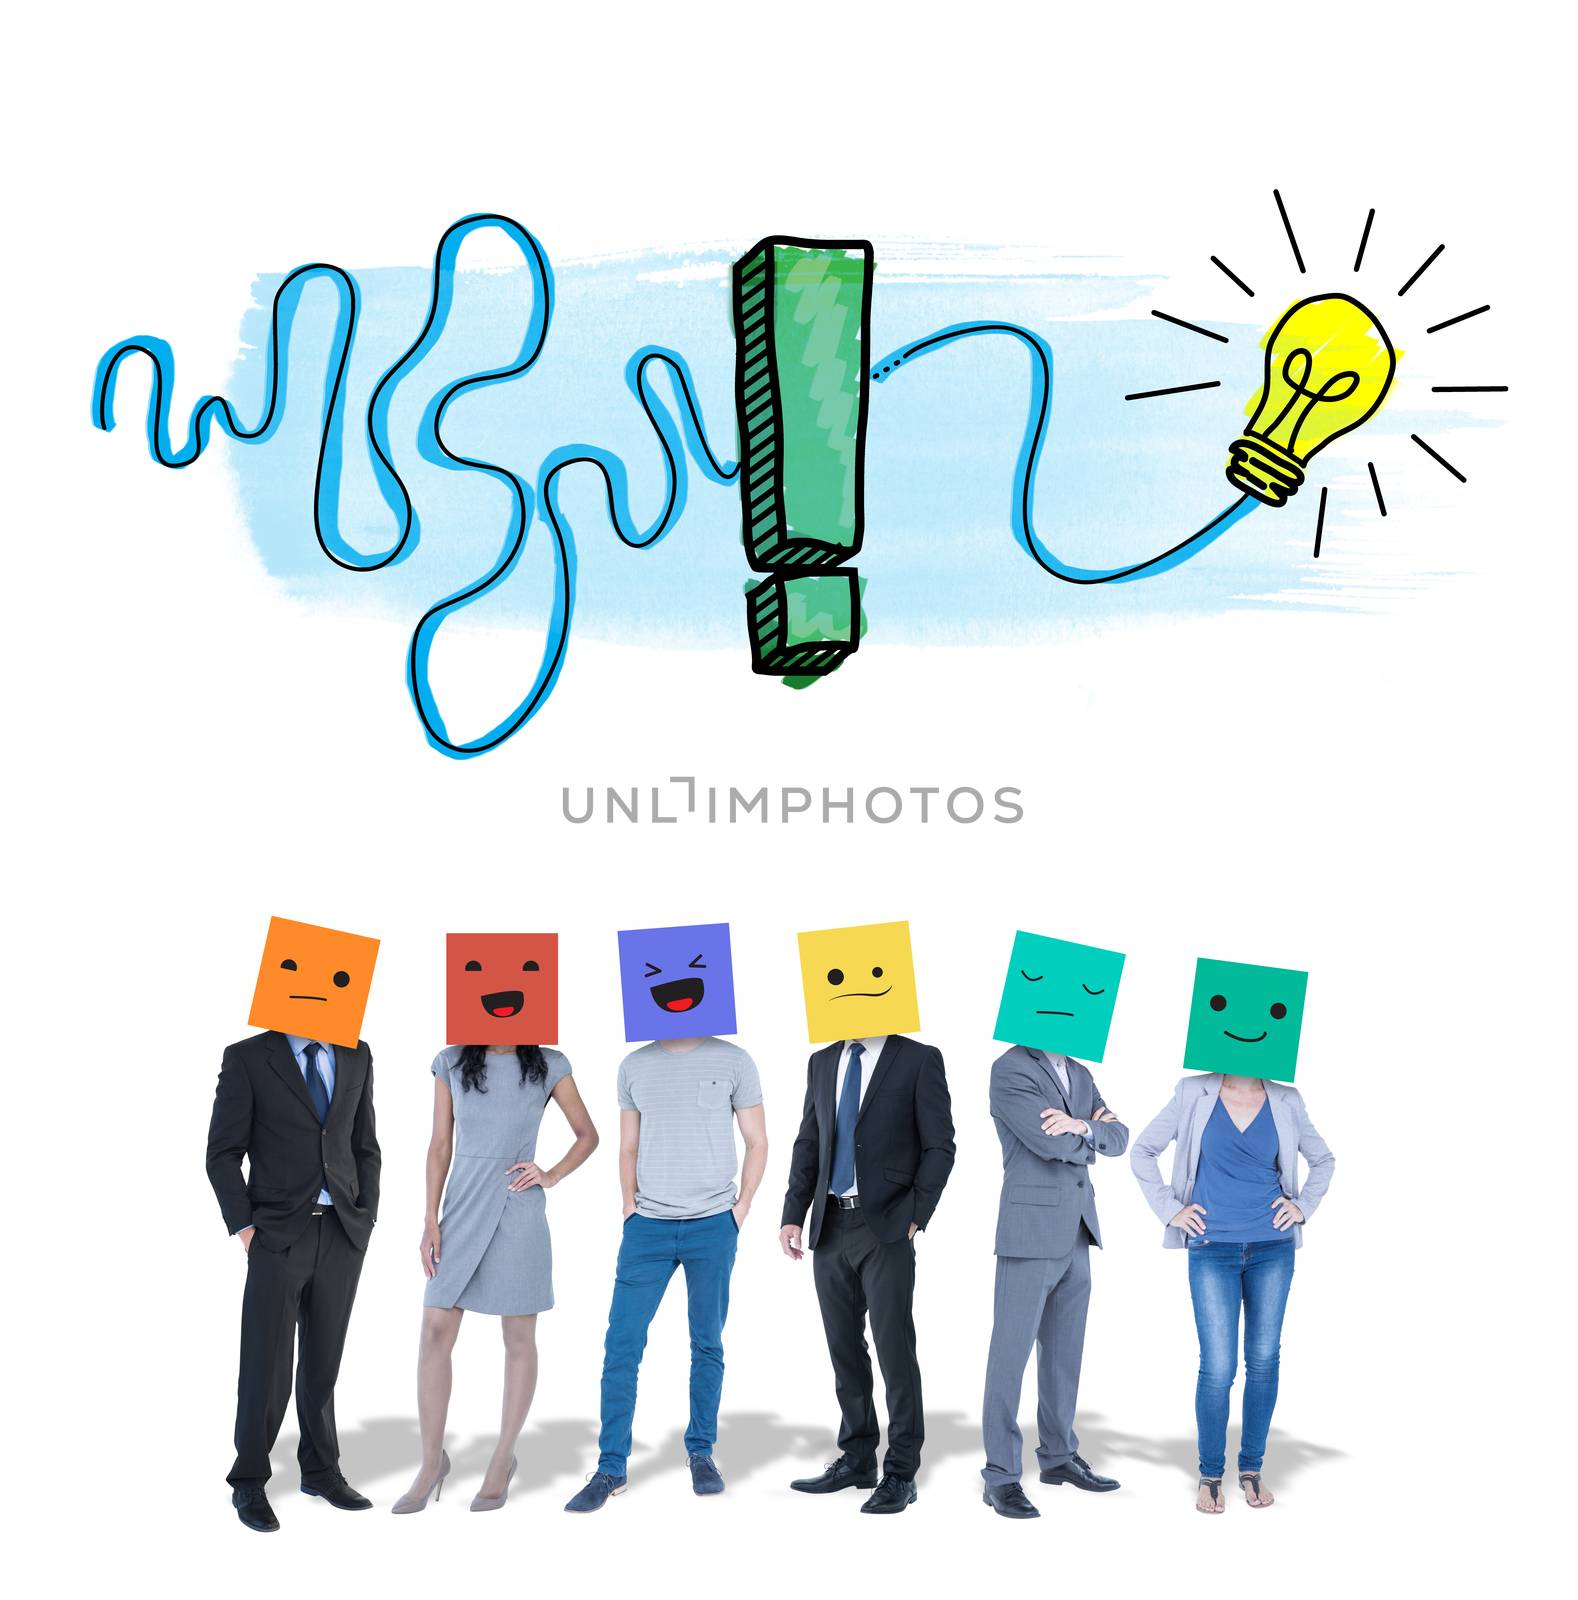 People with boxes on their heads against exclamation and light bulb